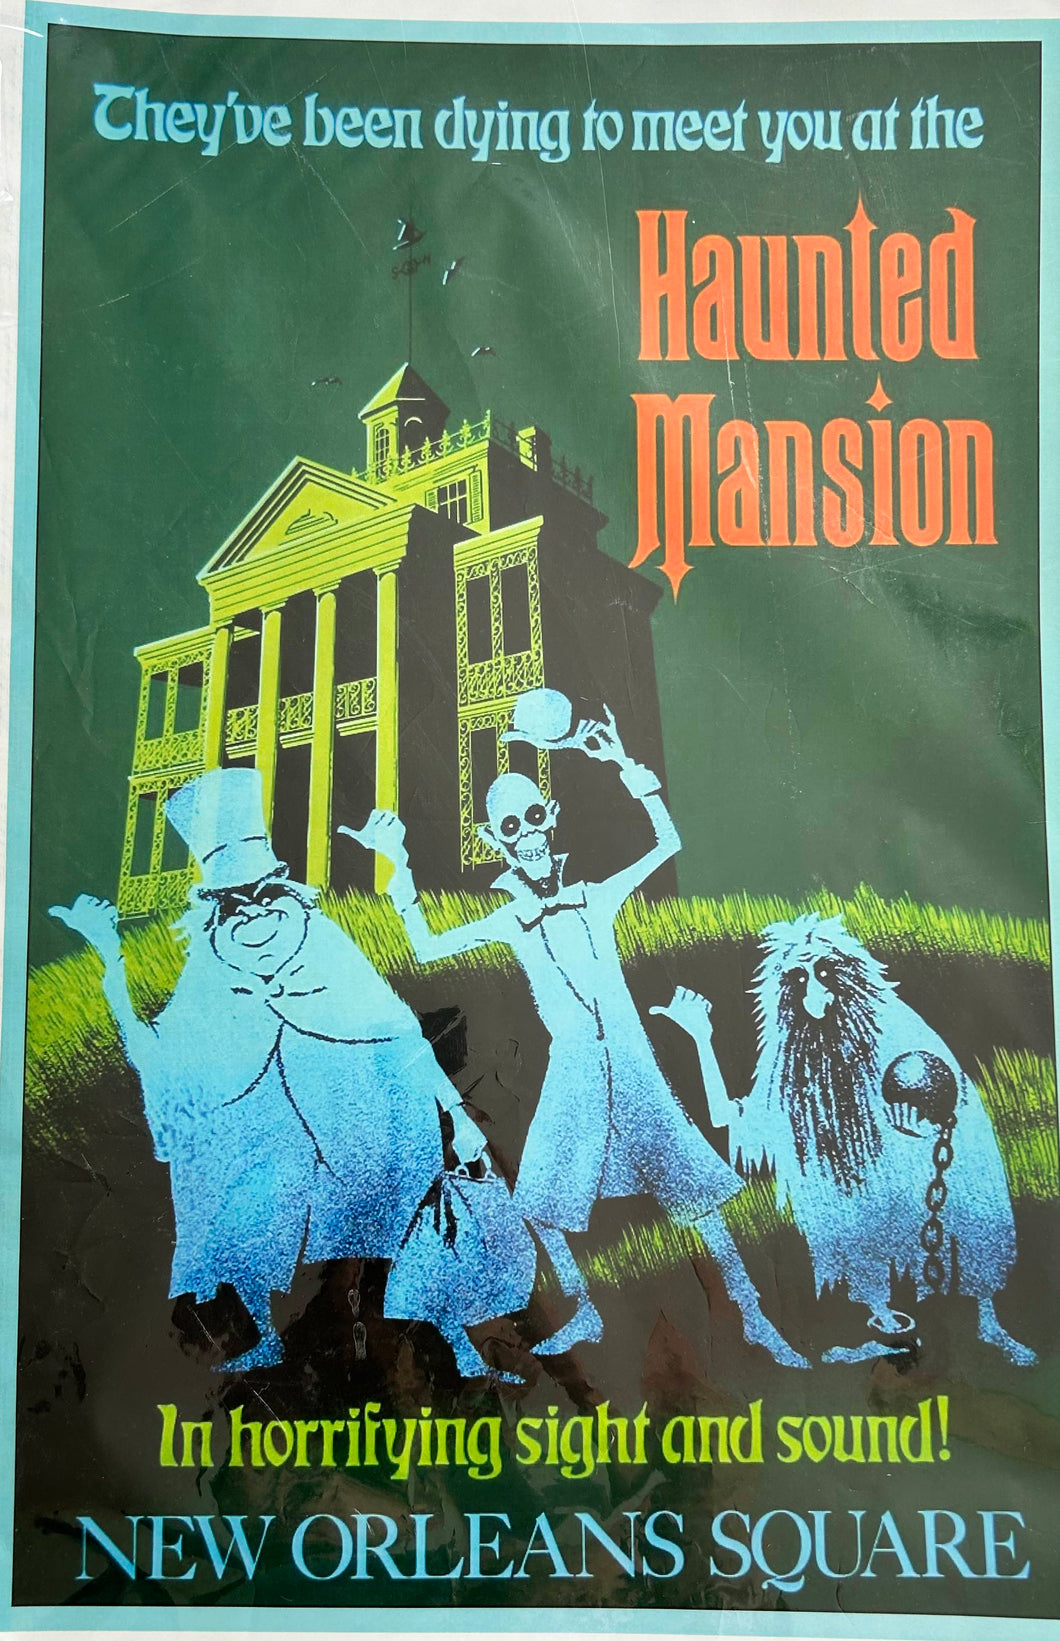 Vintage Attraction Poster - Haunted Mansion